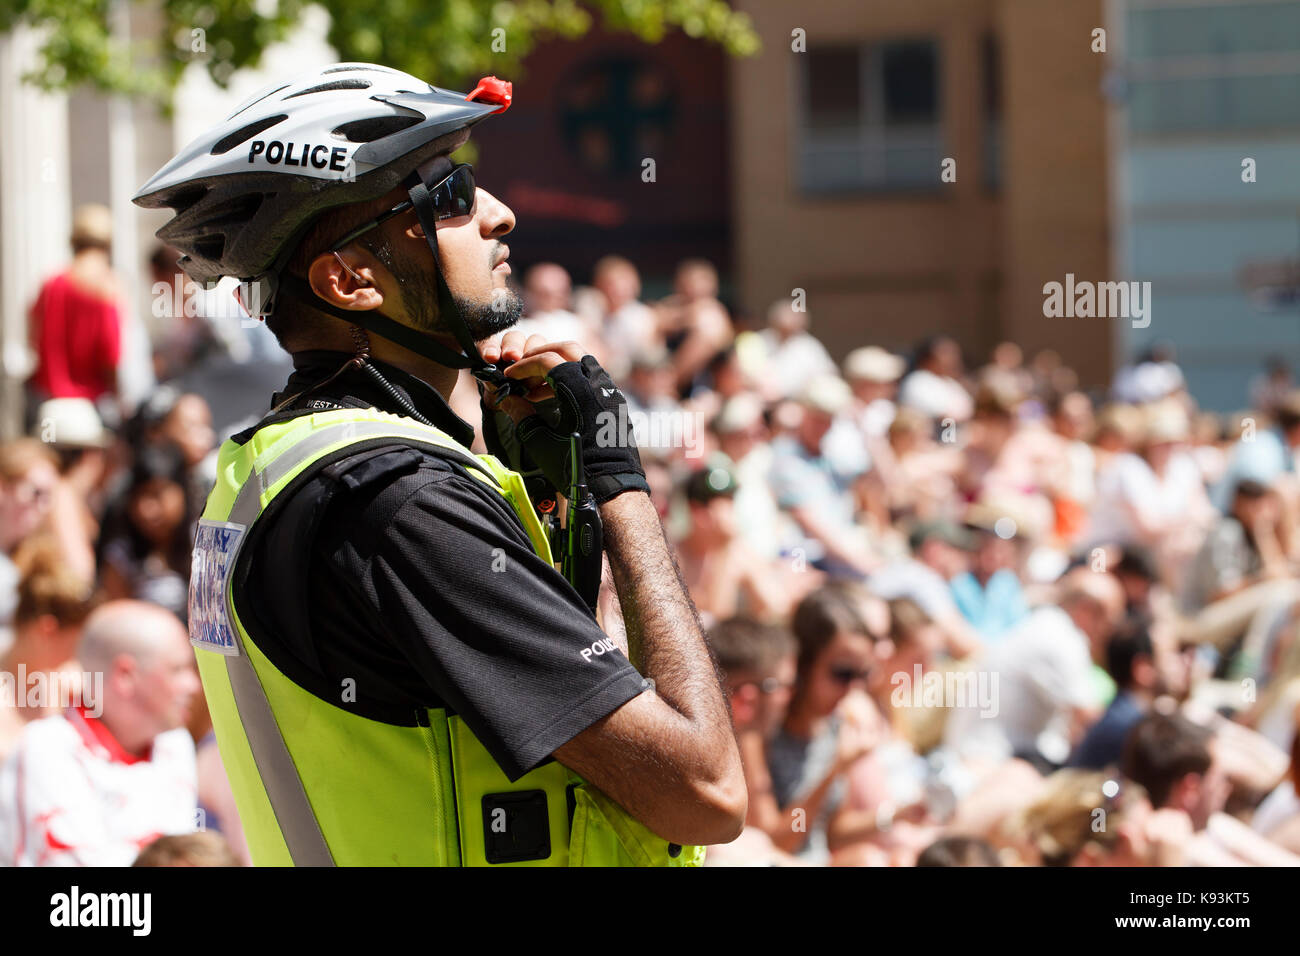 An Asian British Policeman adjusts his pedal cycle helmet in front of a large crowd a a event in central Birmingham, UK Stock Photo